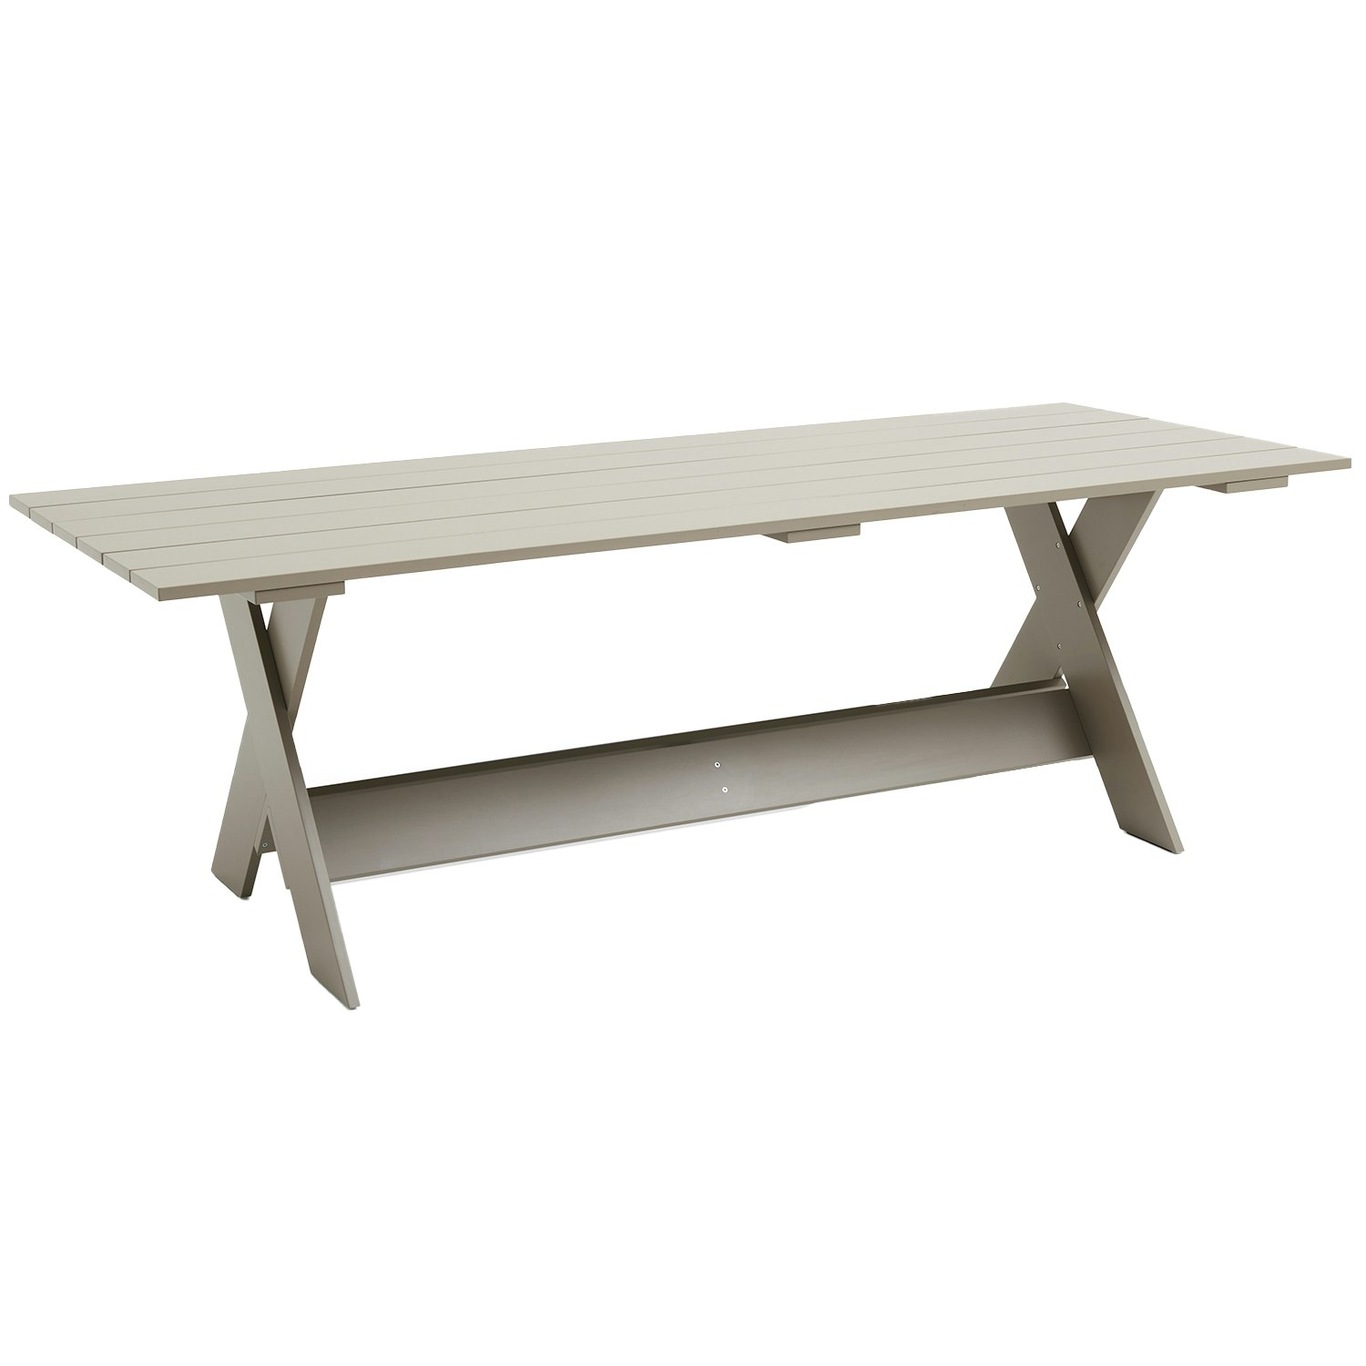 Crate Dining Table 90x230 cm, London Fog